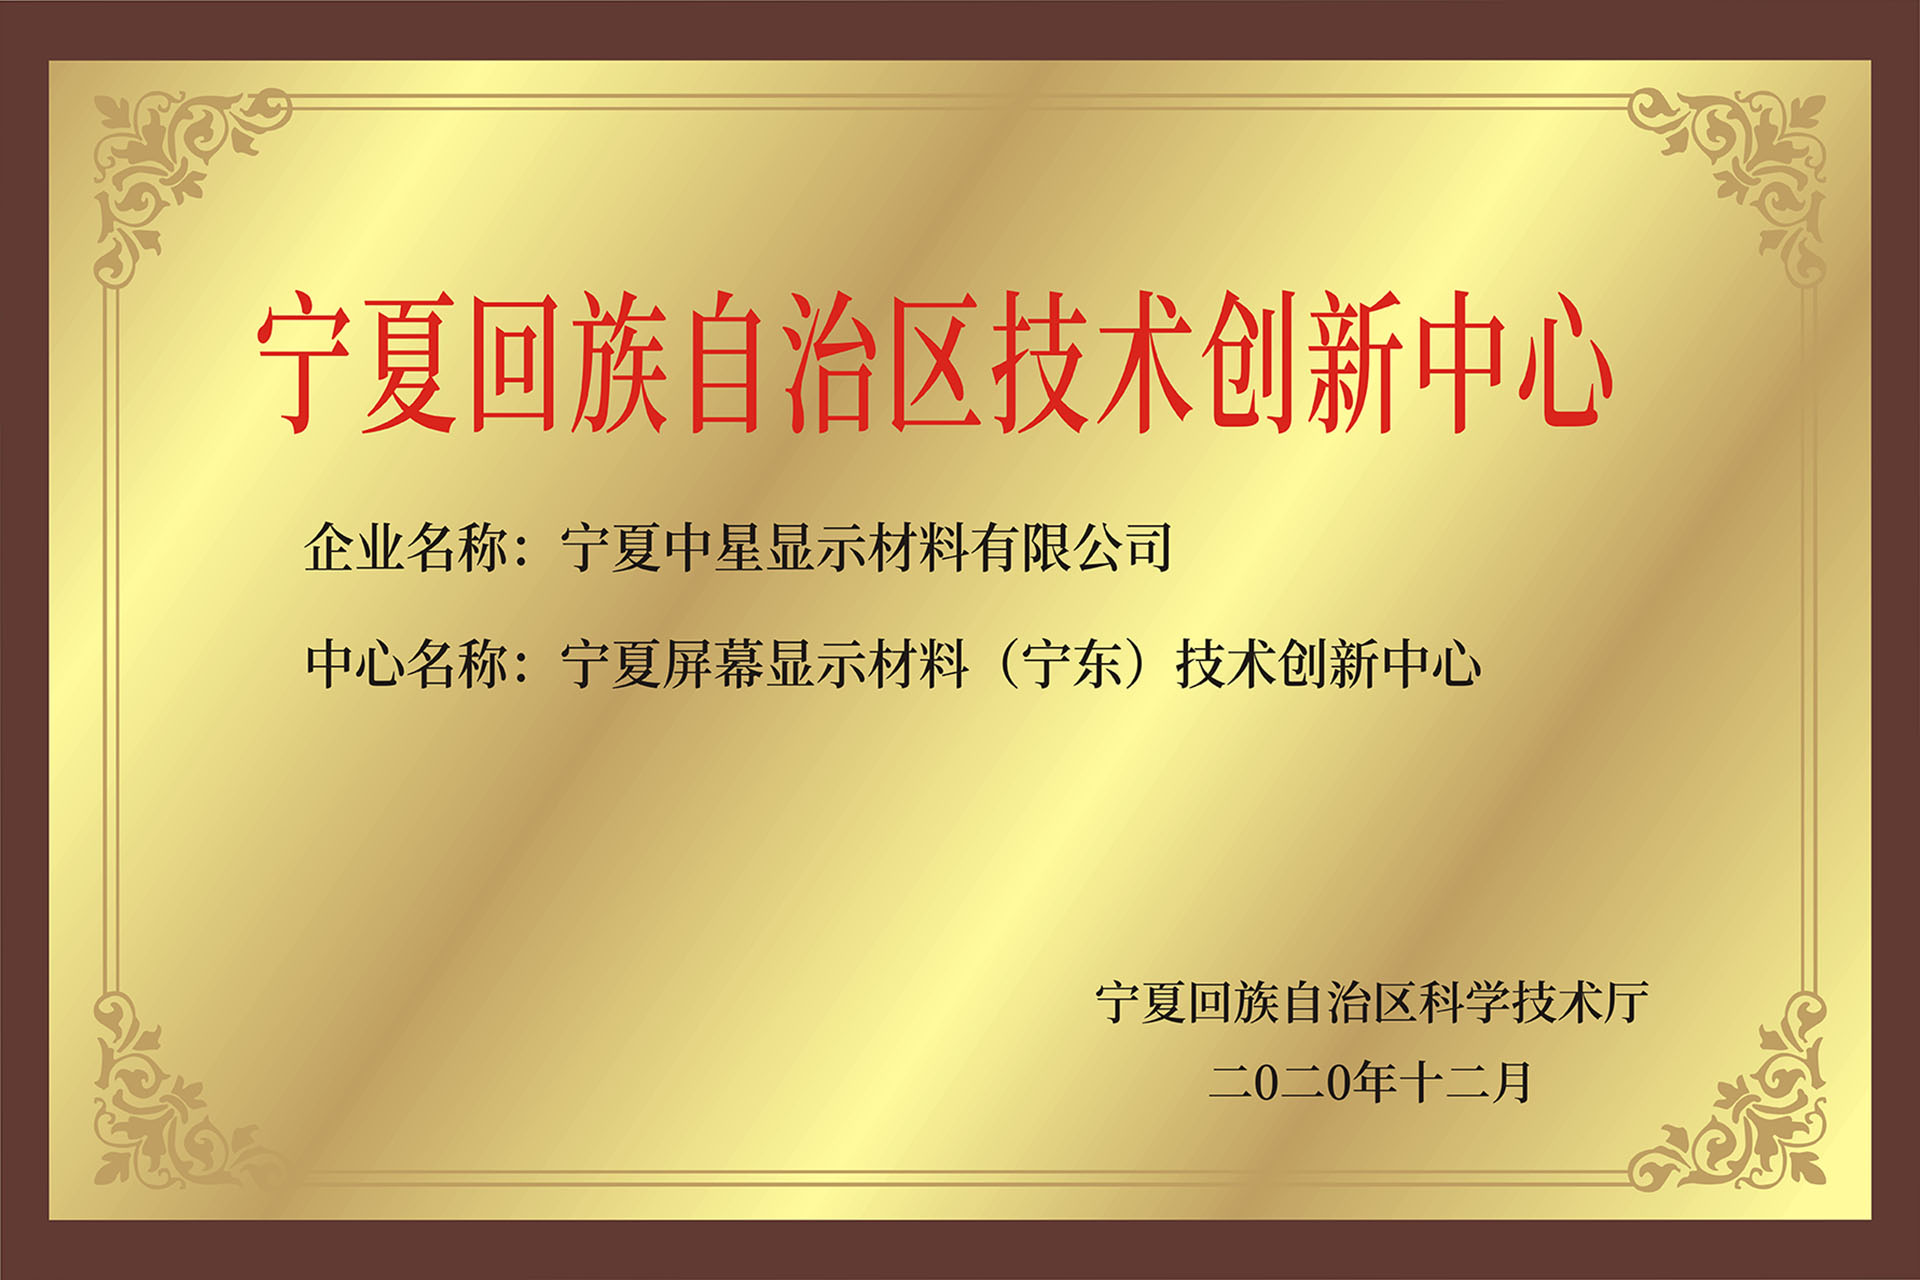 Ningxia screen display materials (Ningdong Technology Center) has past the  certification.